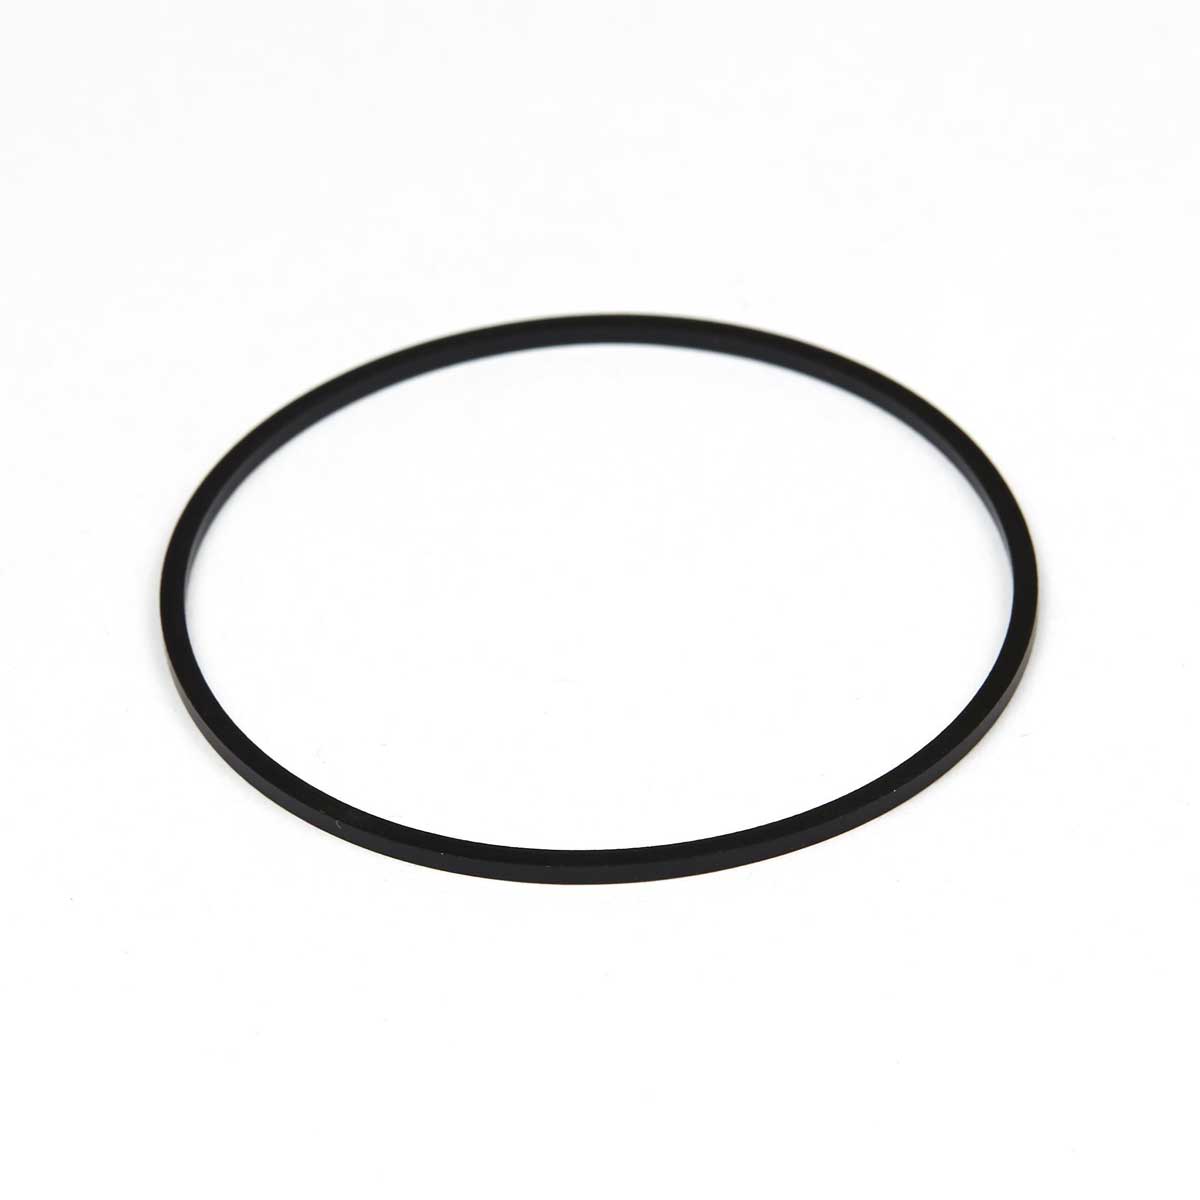 Briggs & Stratton Genuine 806481 GASKET-FLOAT BOWL Replacement Part - image 1 of 3